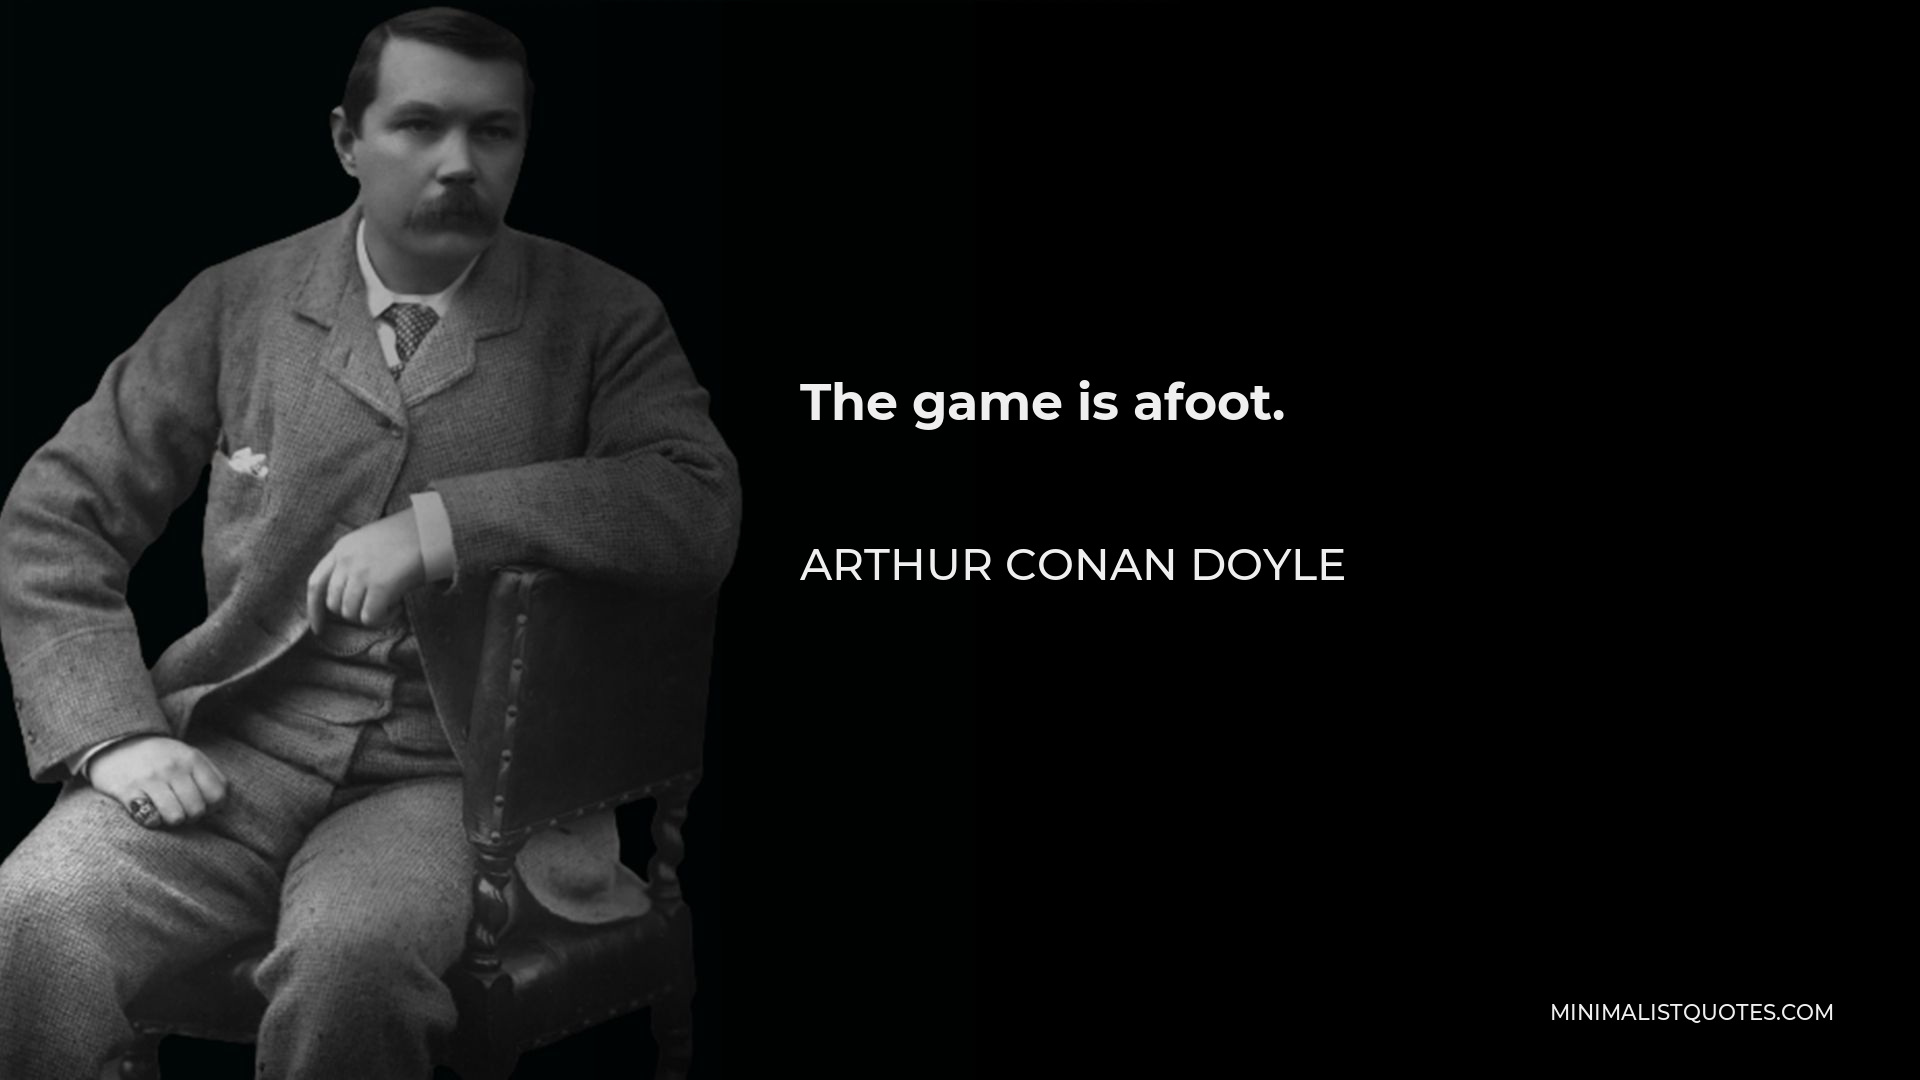 Arthur Conan Doyle Quote - The game is afoot.